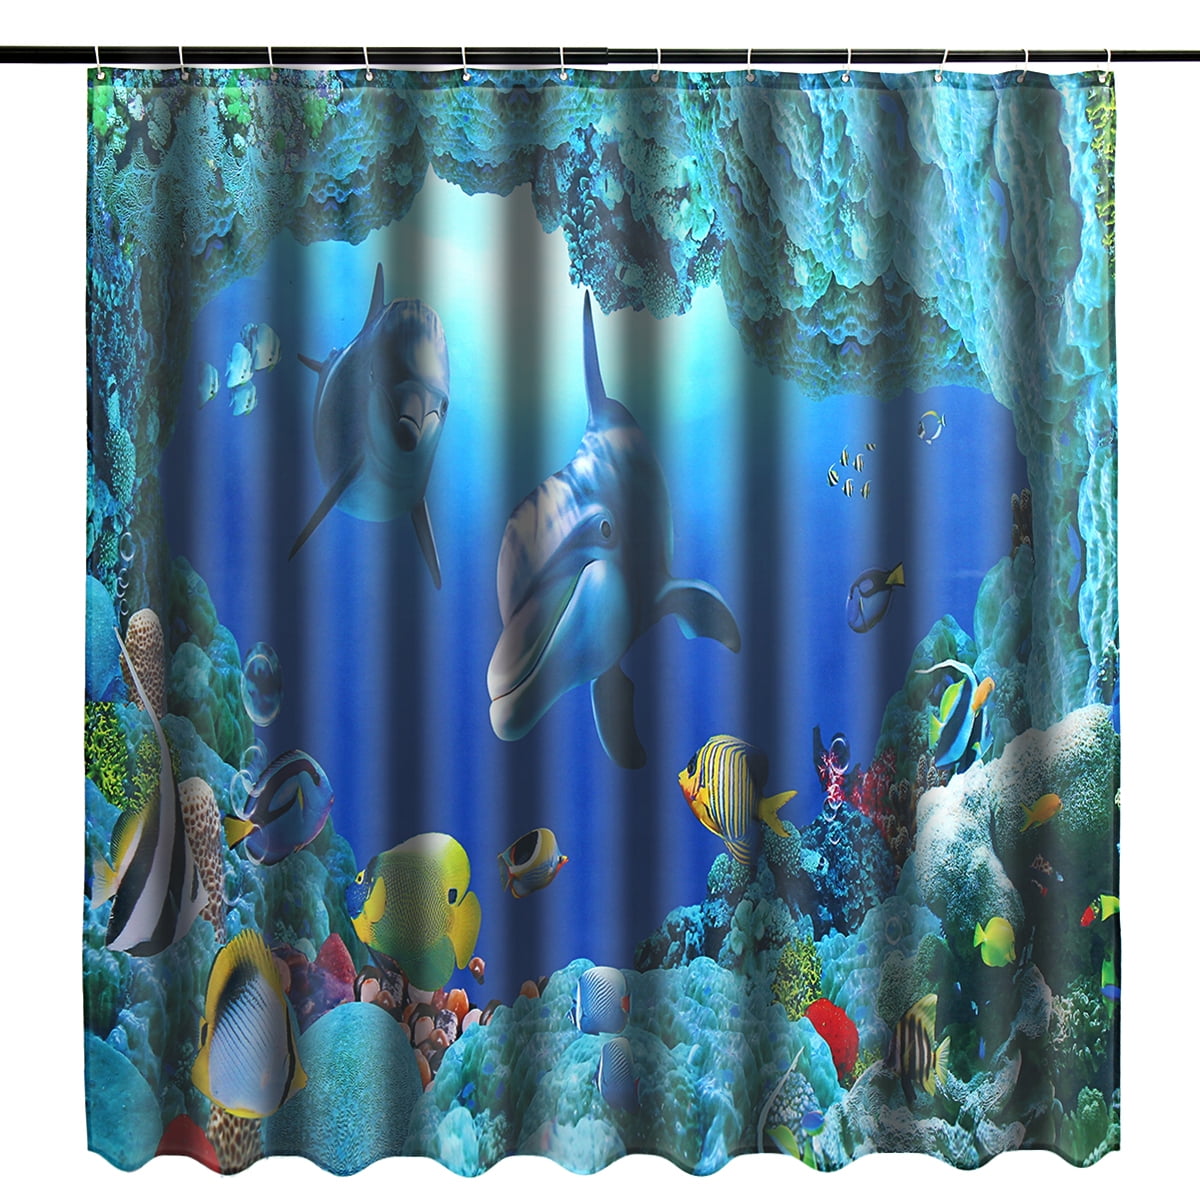 Shower Curtain Dolphin Animal Design Standard Size 180 X 180CM With Rings Hooks 